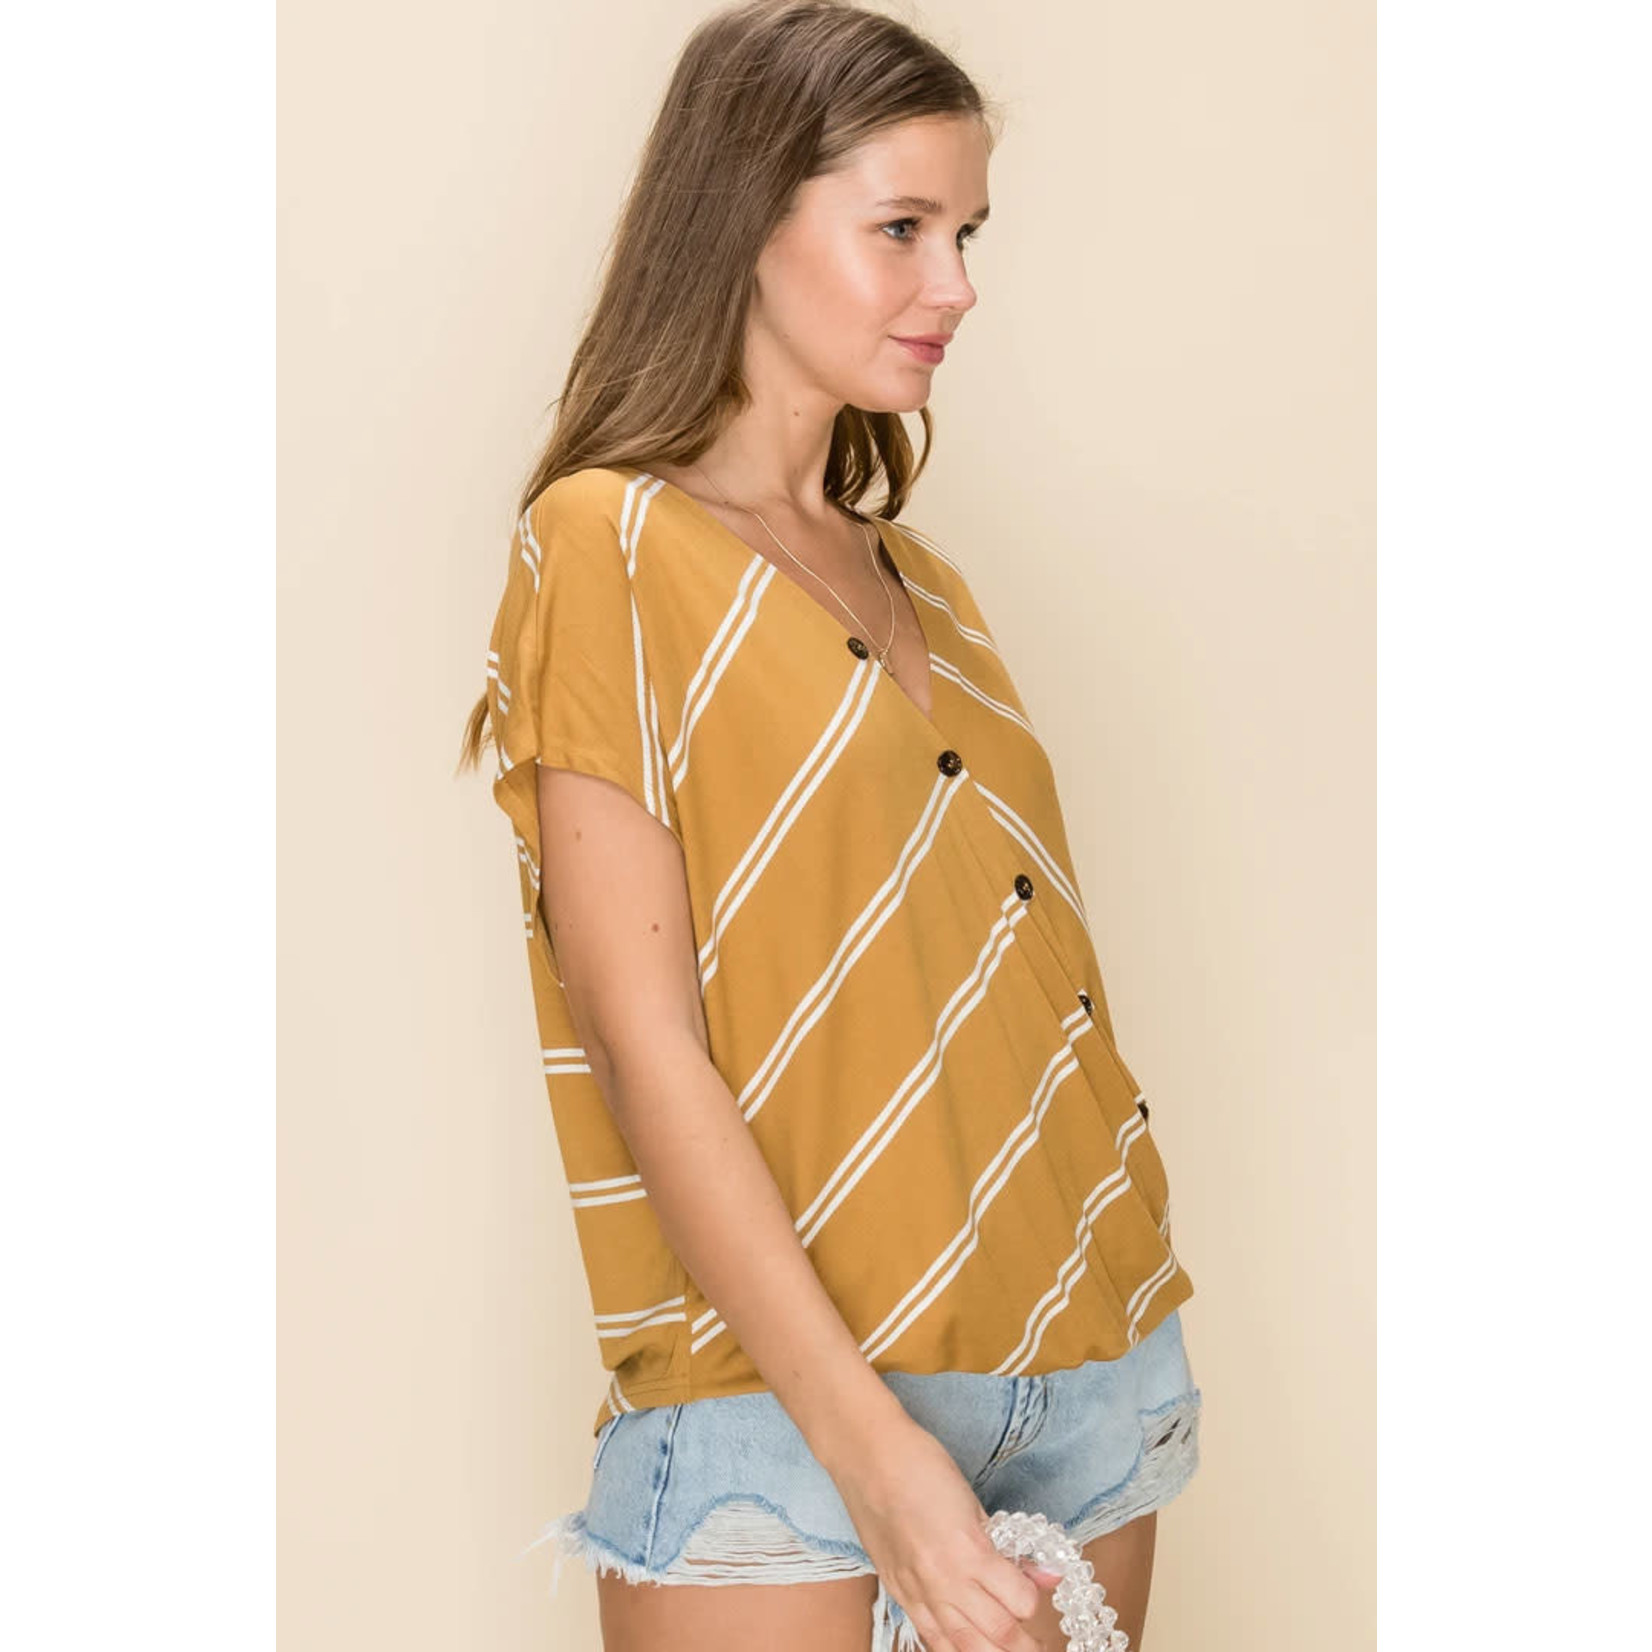 HYFVE Crossover V Neck with Horn Button Top